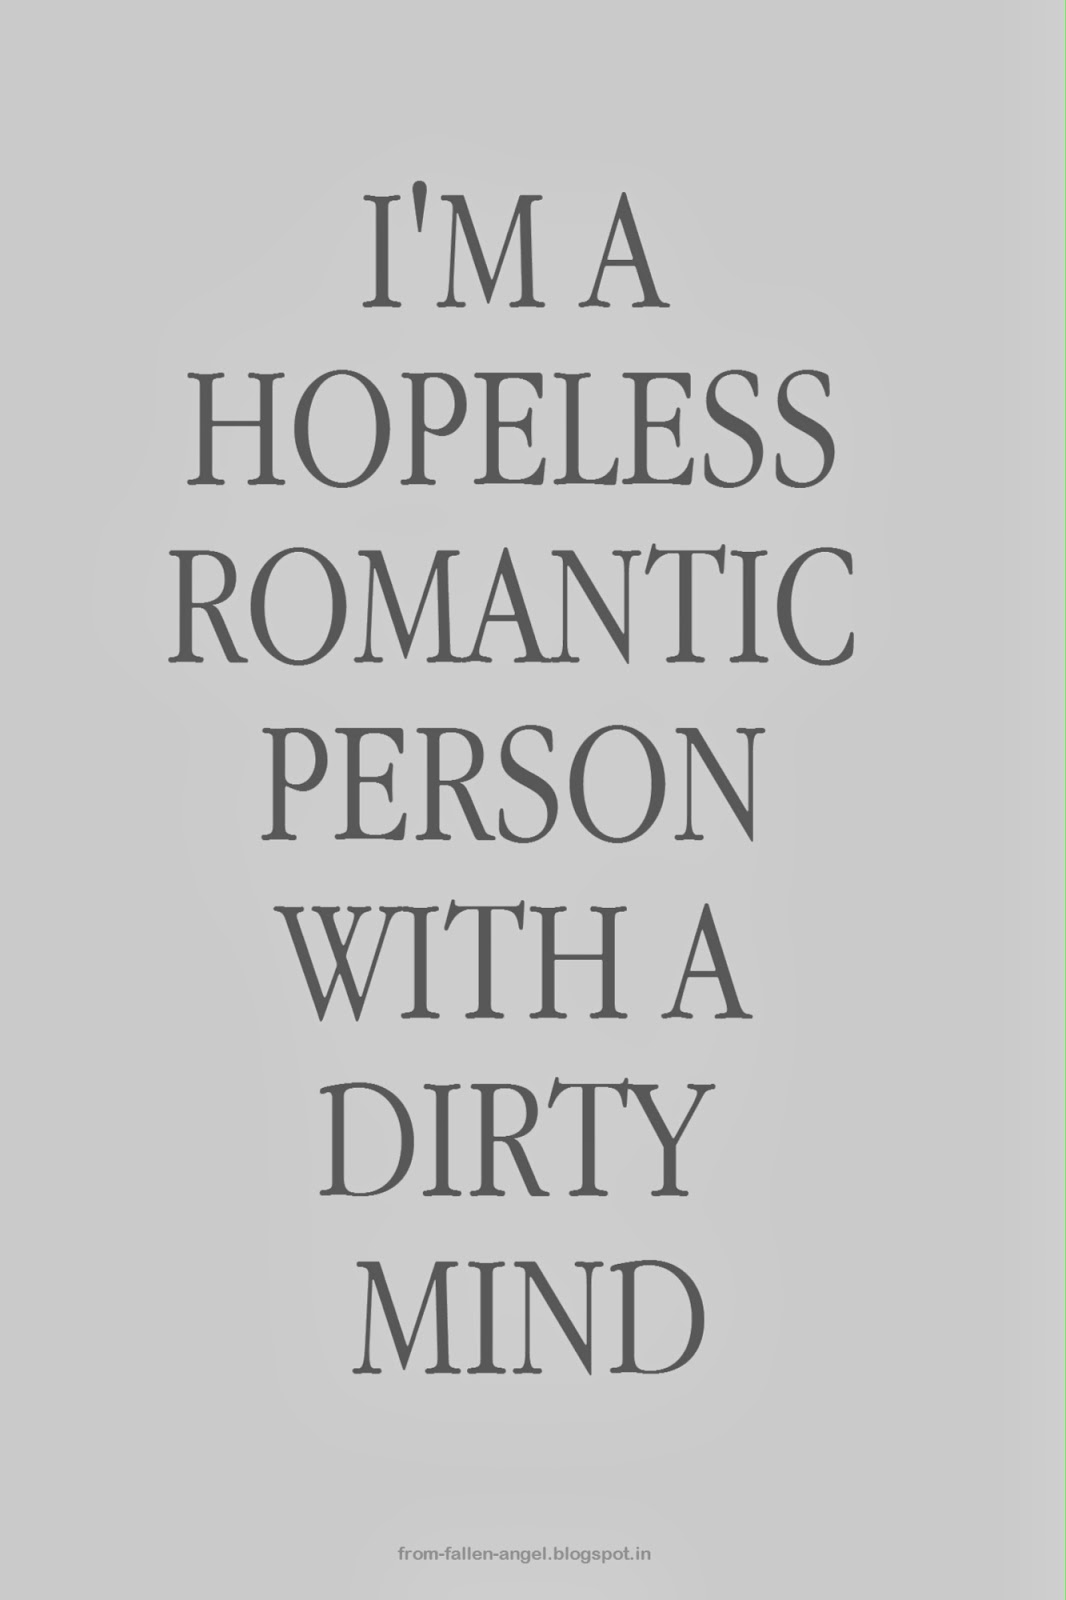 Fallen Angel: I'm a hopeless romantic person with a dirty mind